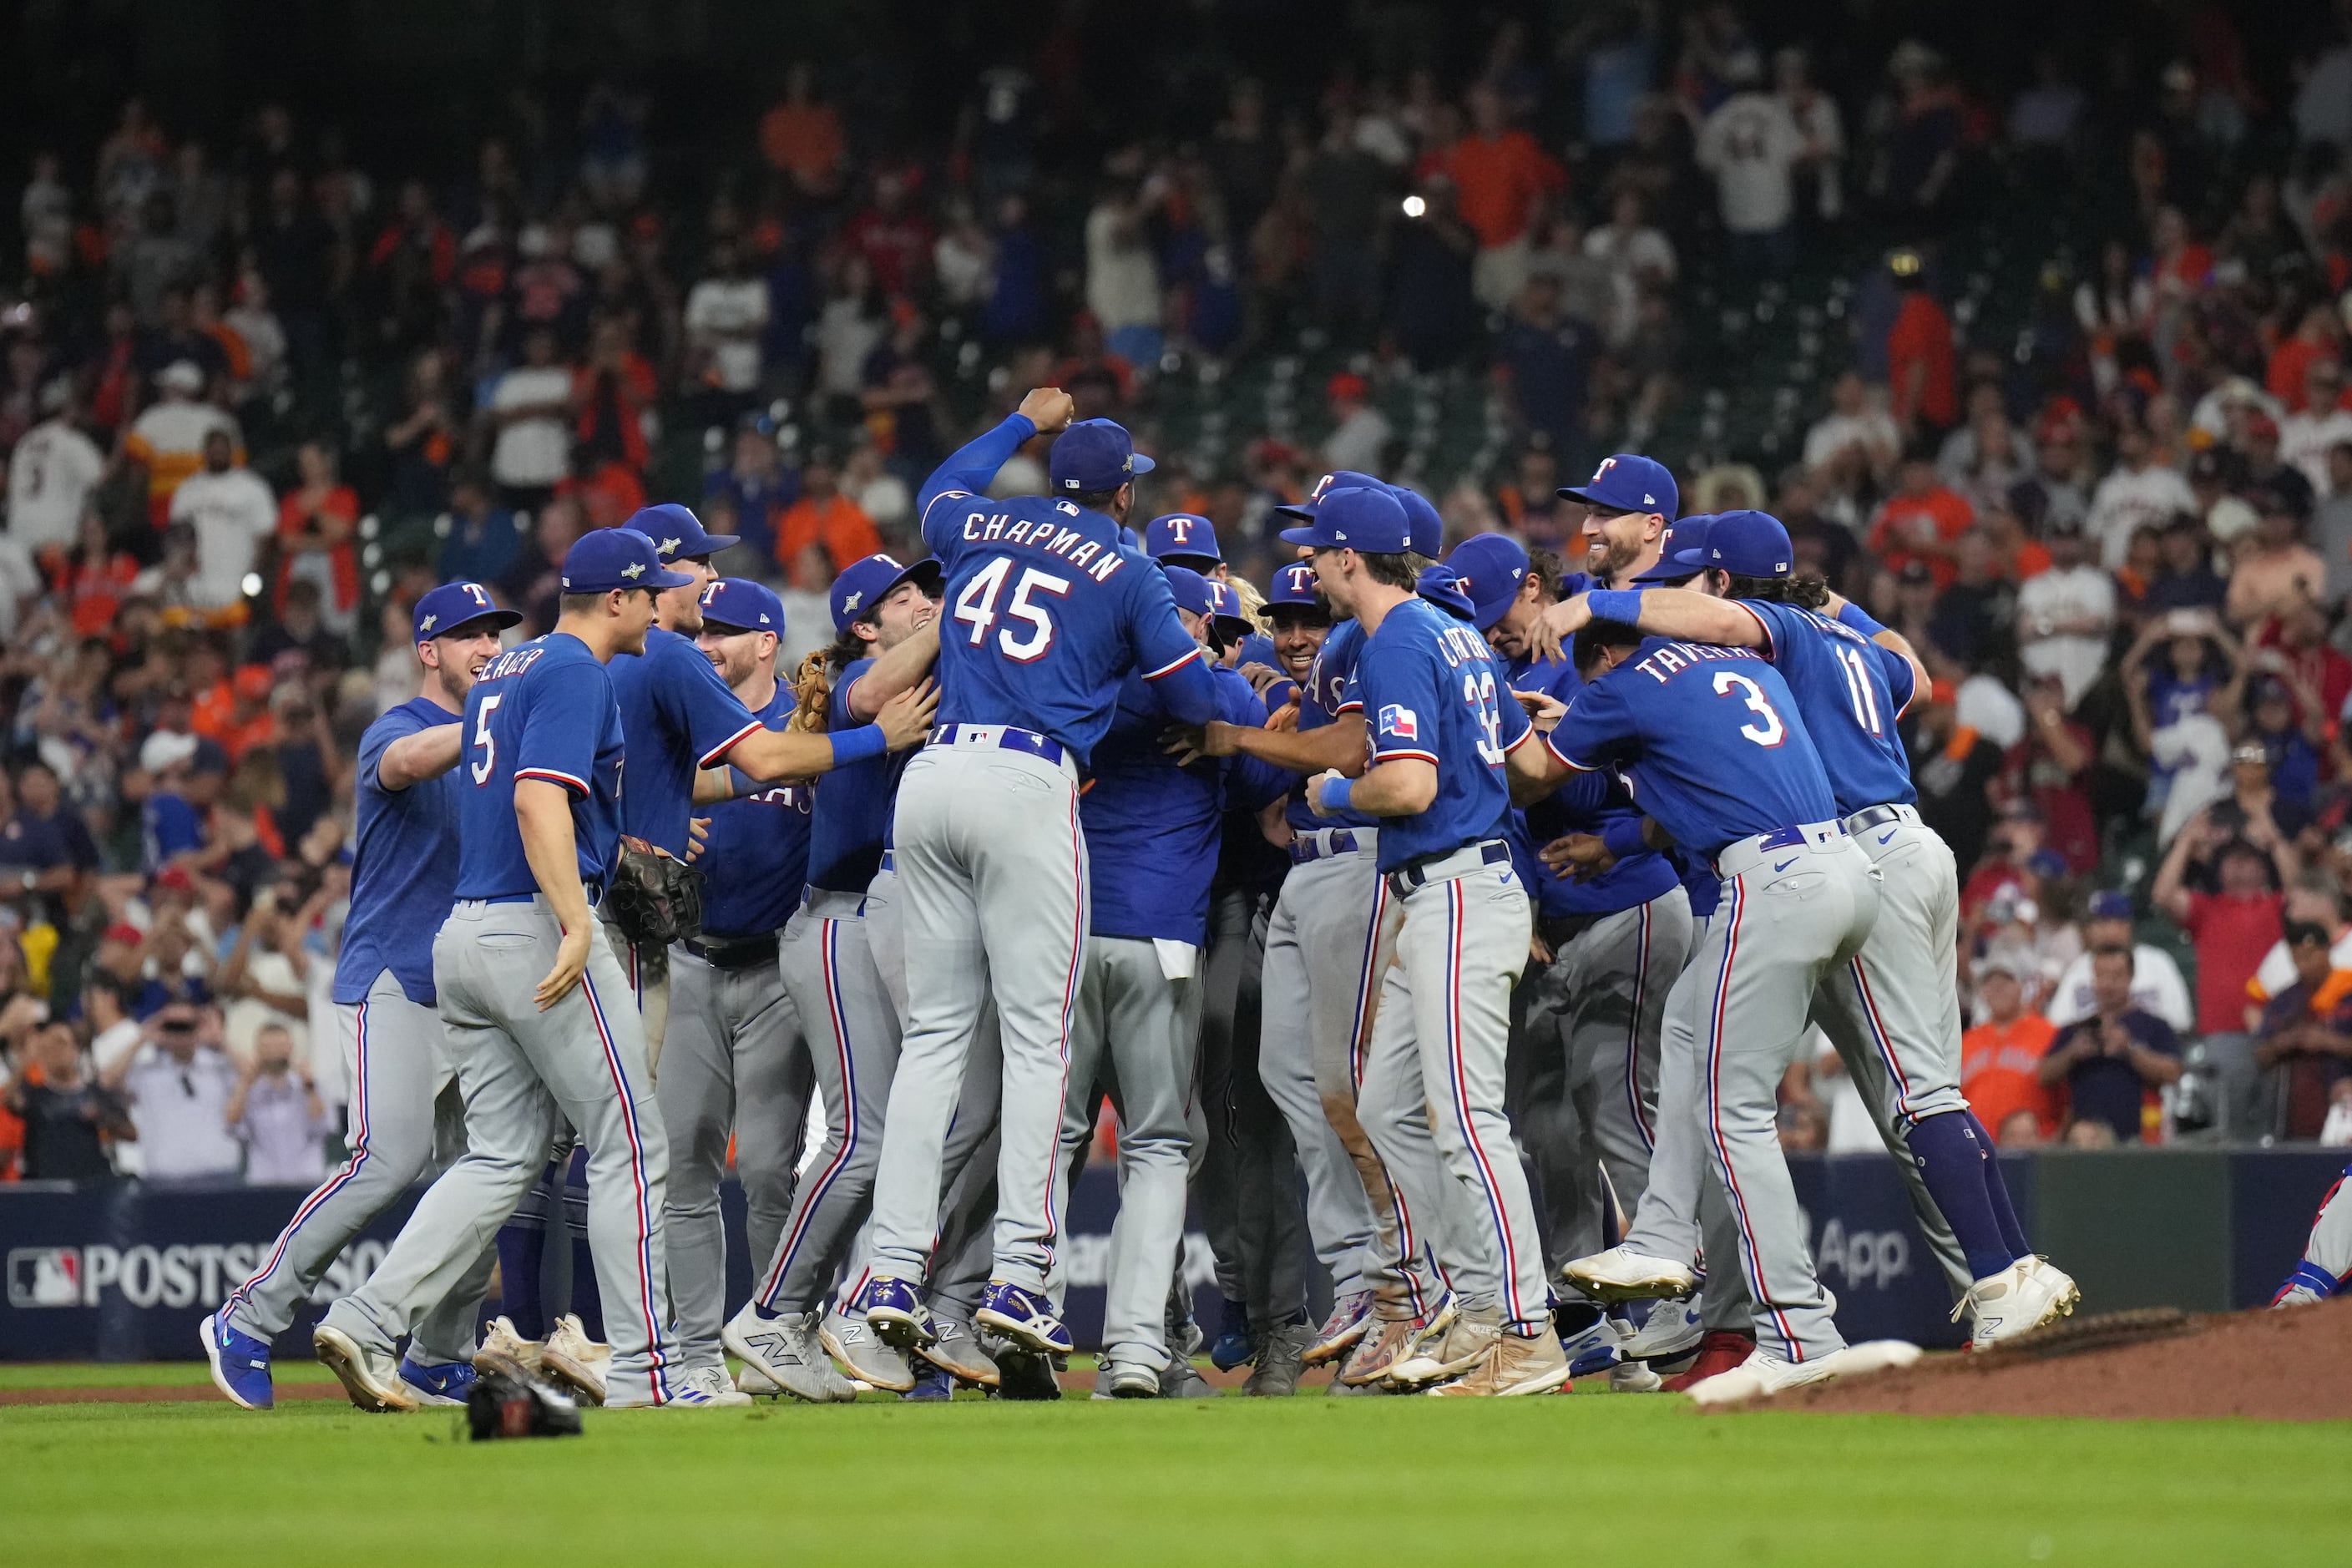 How much money do the Texas Rangers get if they reach the MLB World Series?